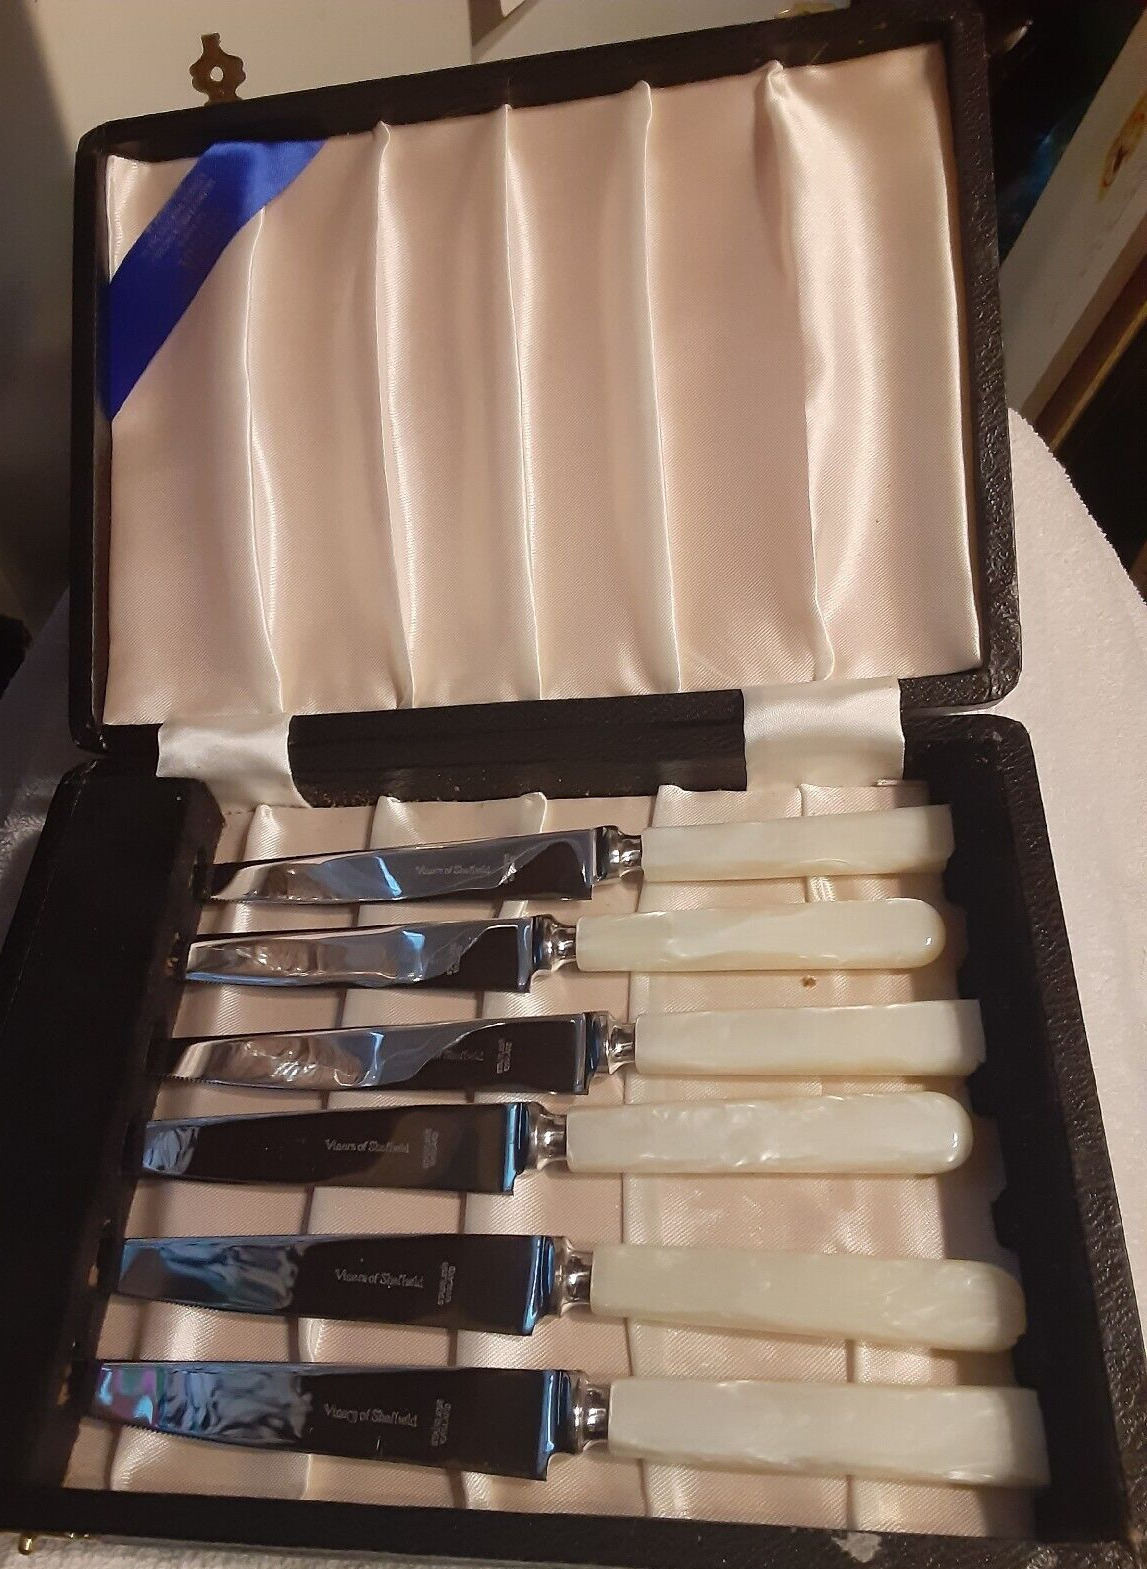 Viners of Sheffield England Stainless Set of 6 Knives in Orig. Box 